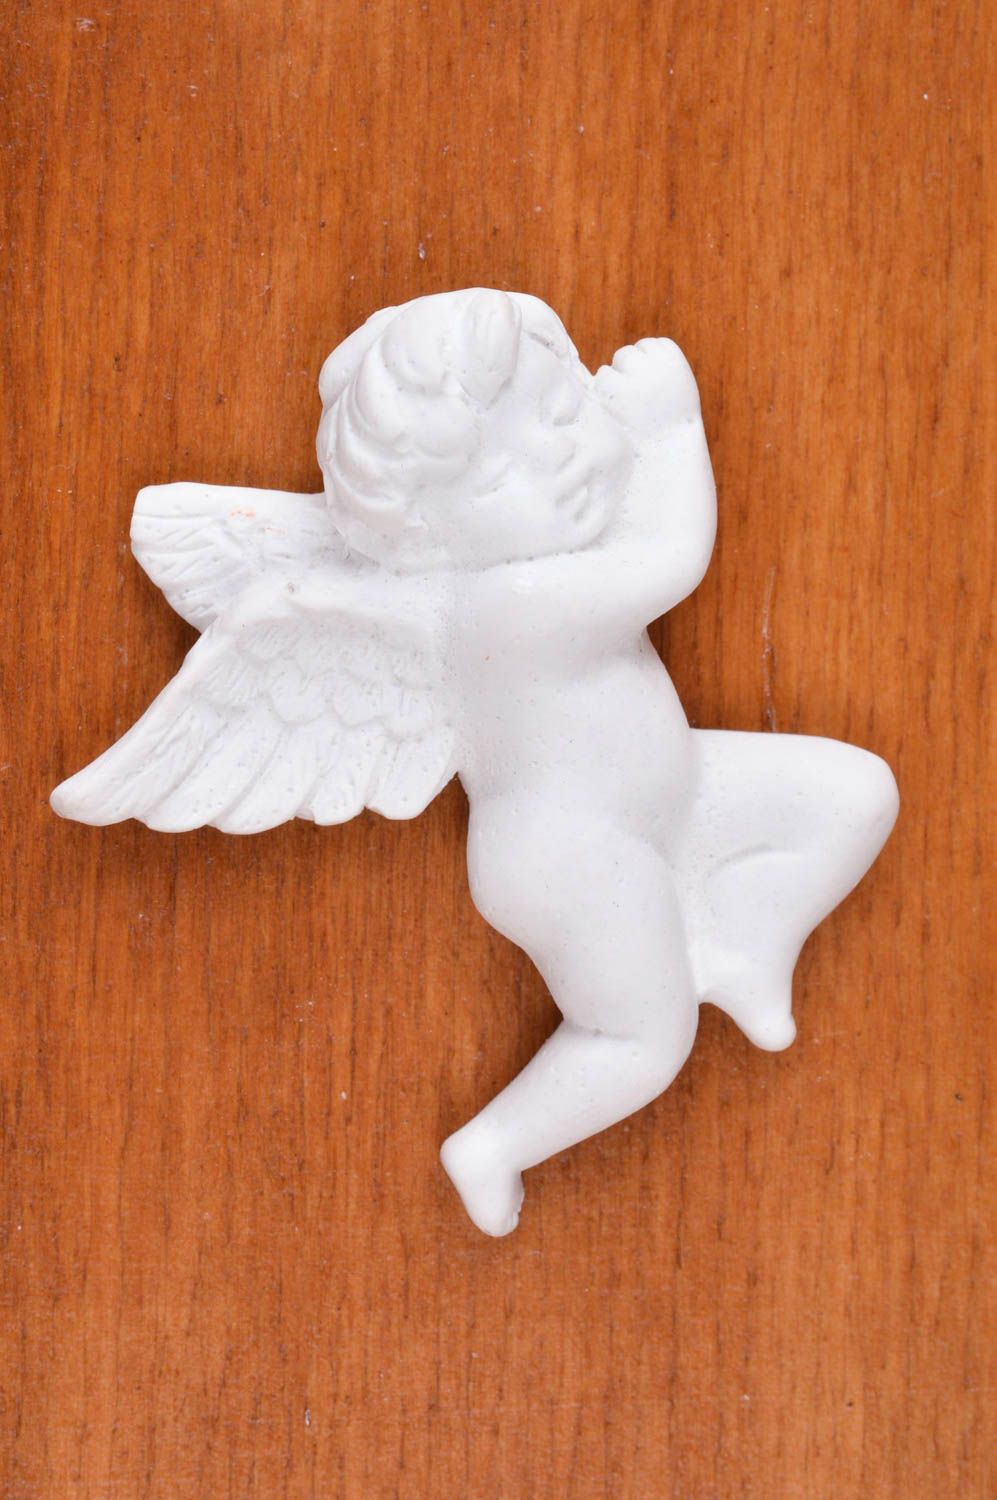 Handmade craft blank arts and crafts supply plaster figurine gift ideas for kids photo 1